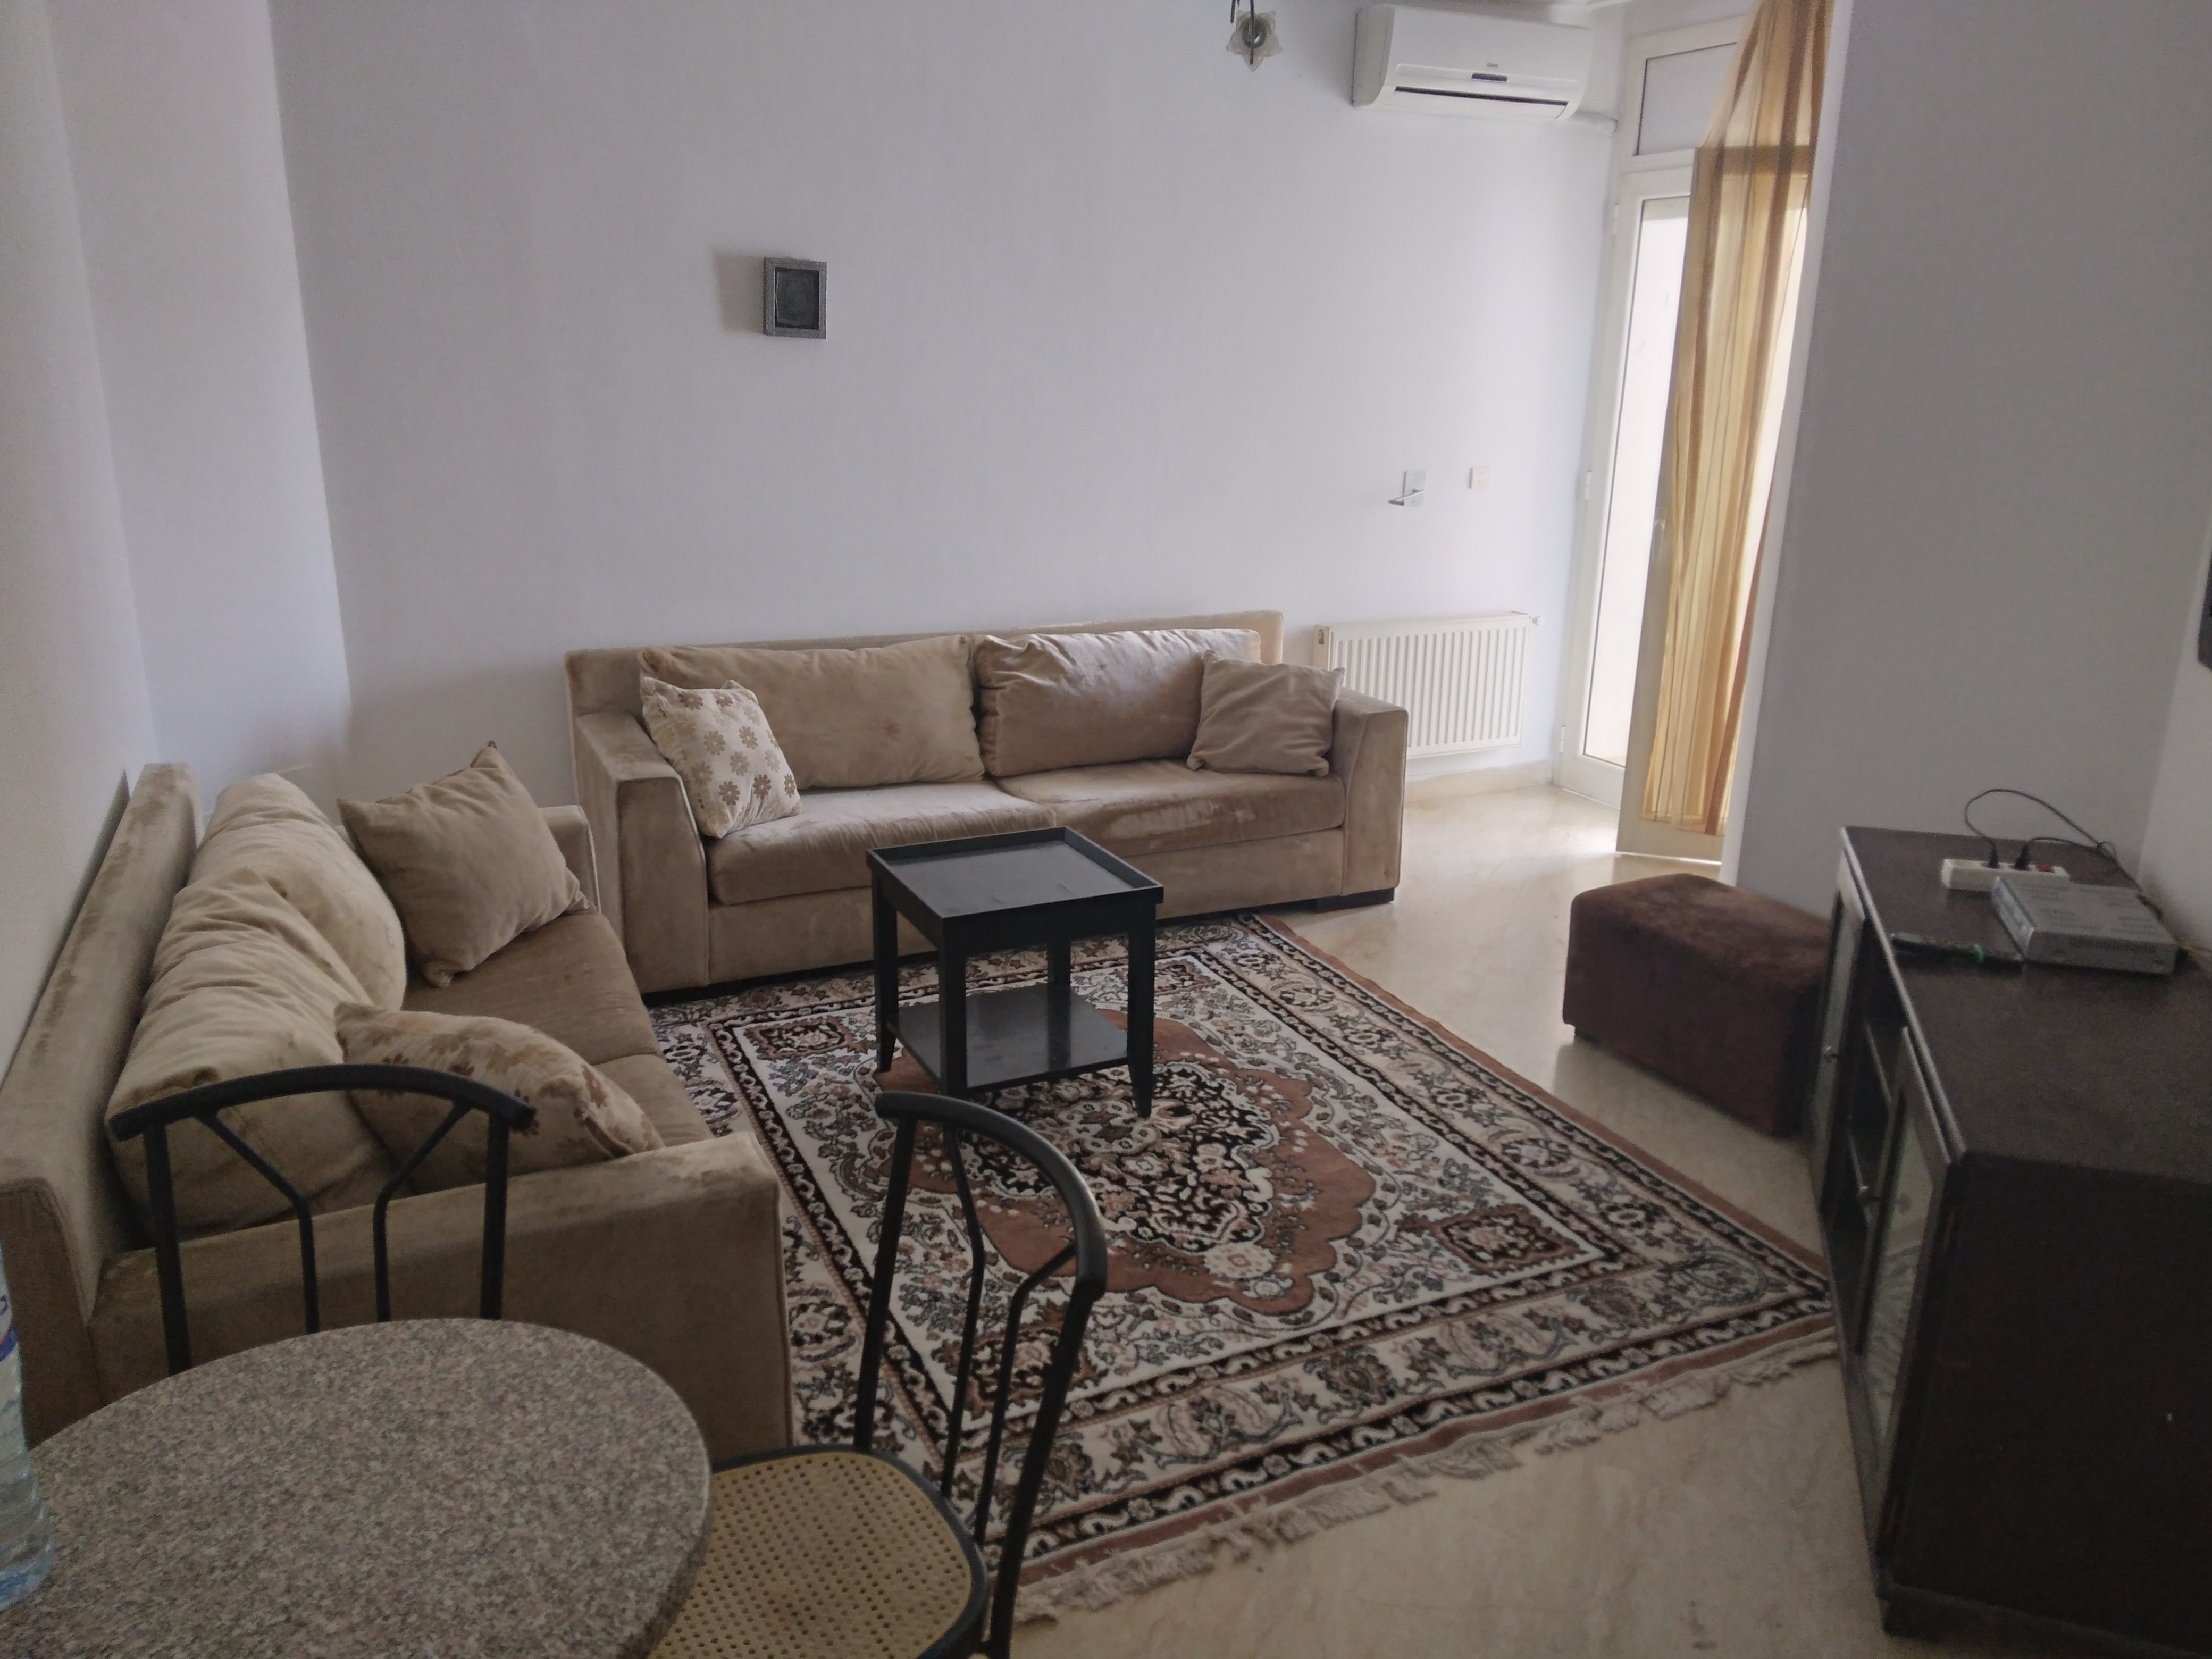 Ariana Ville Cite El Intissar 1 Location vacances Appart. 2 pices Appartement s2 meubl